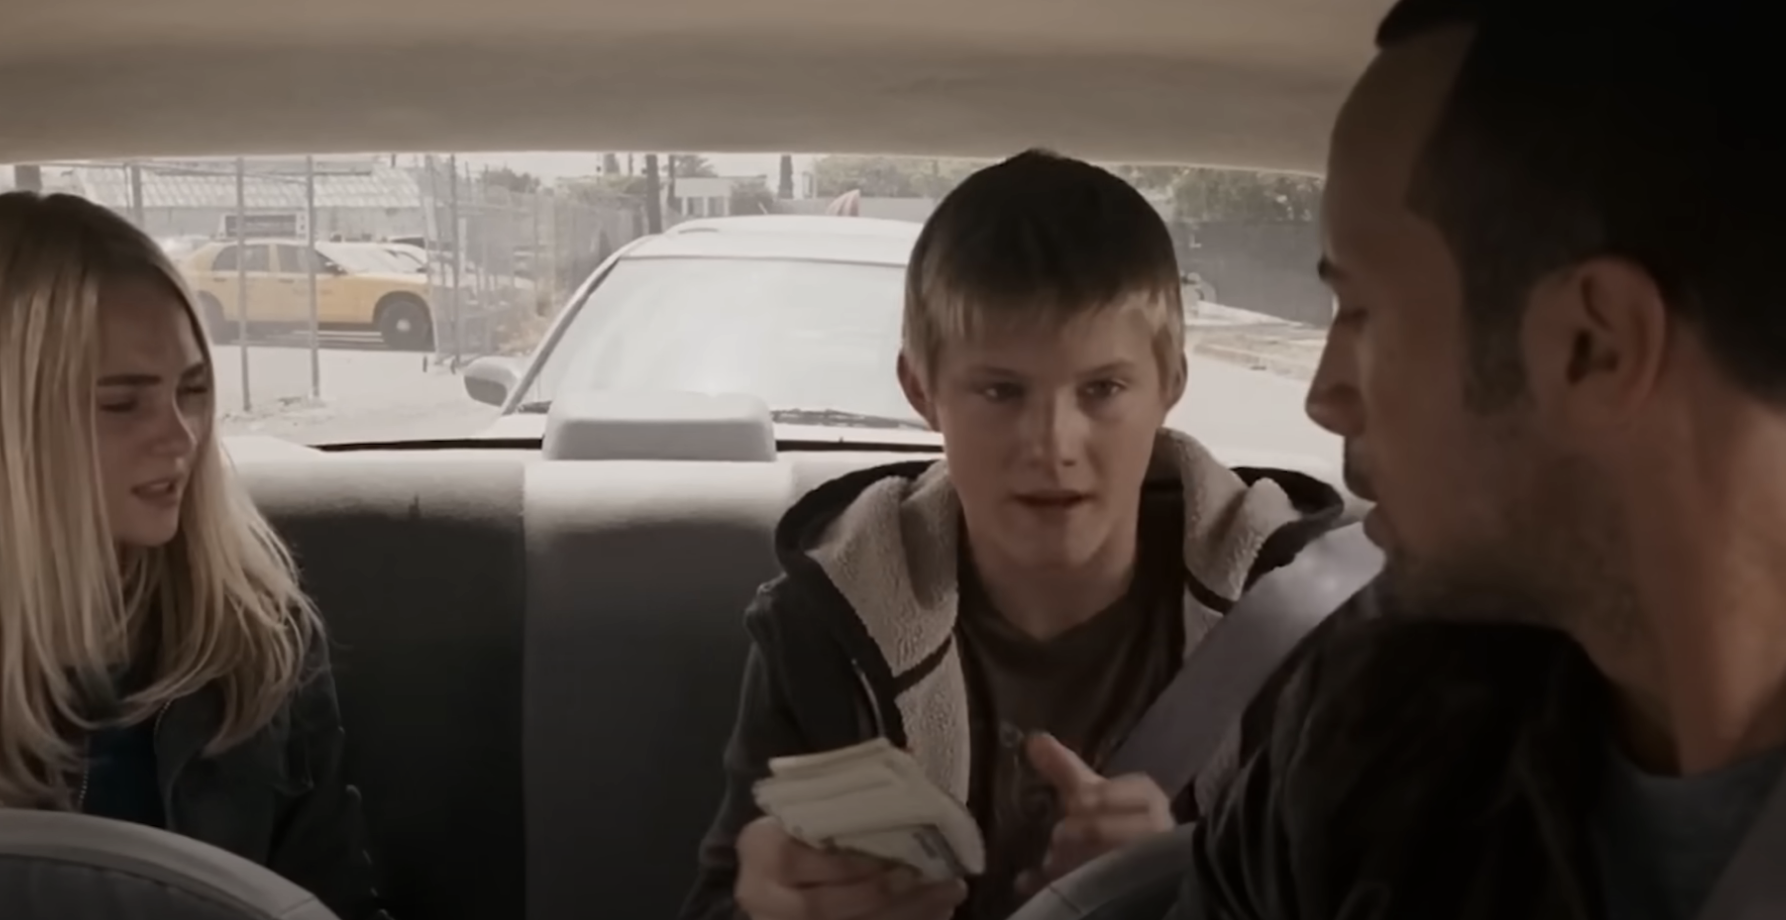 Three characters in a car scene from a movie, with a young boy holding cash in the center